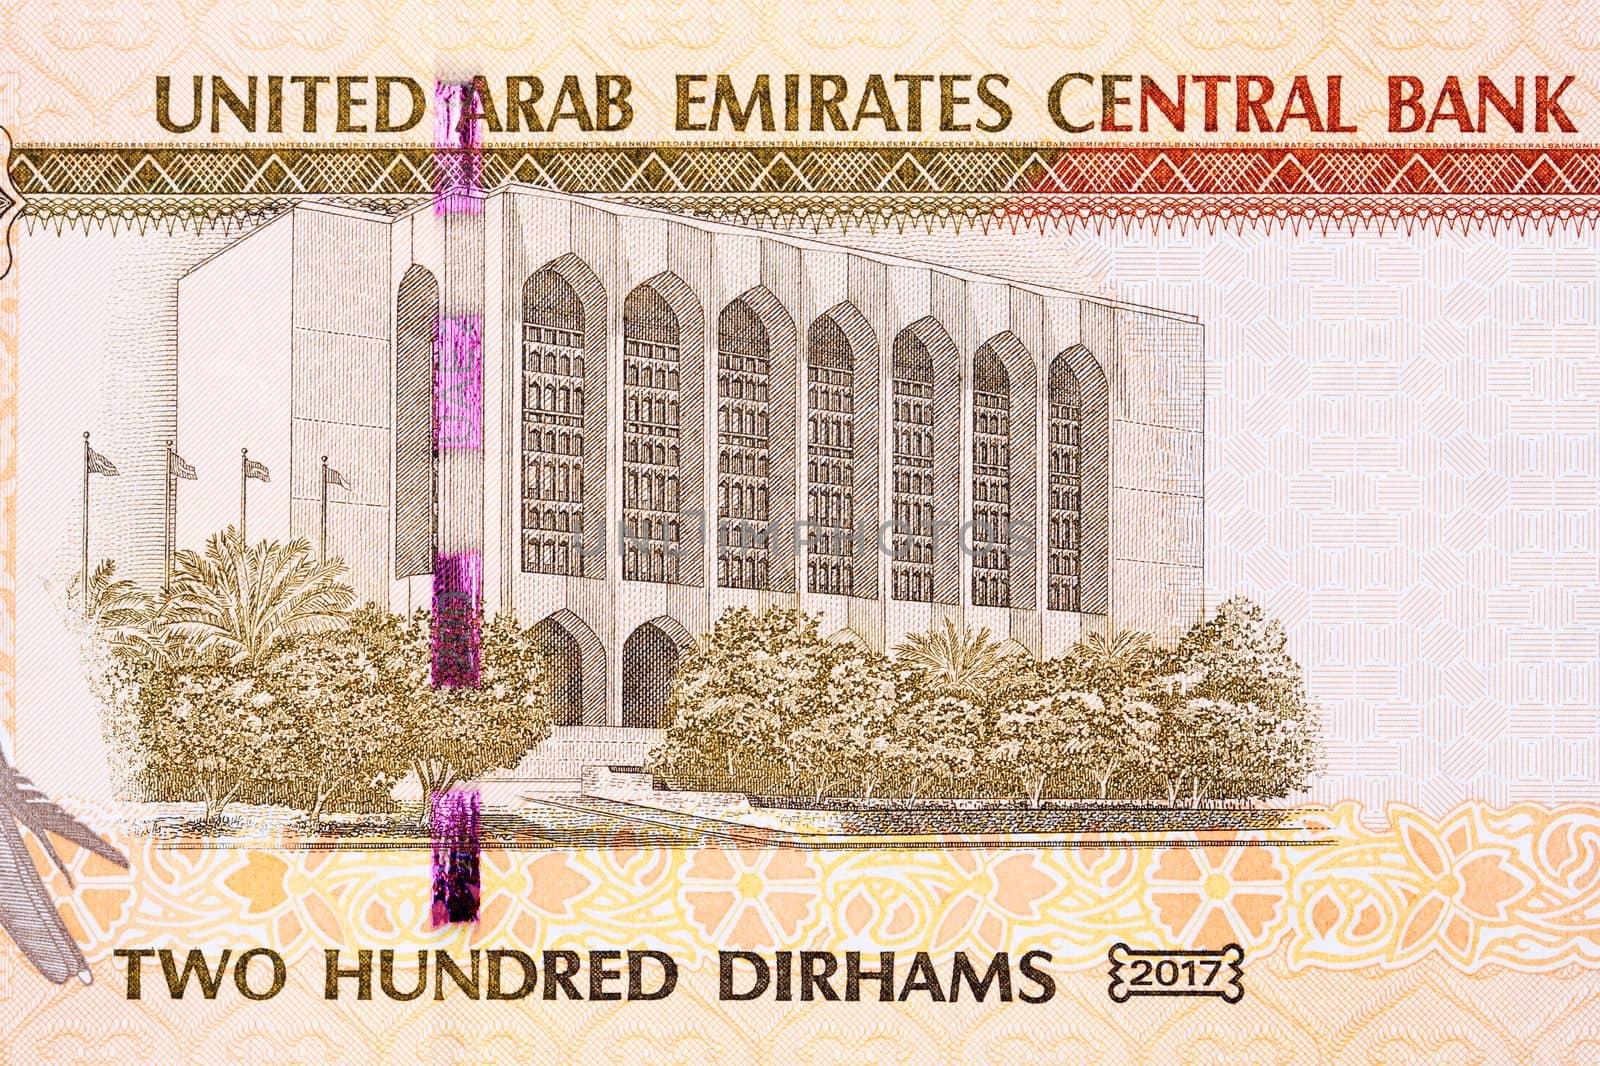 Central Bank Building from United Arab Emirates money - Dirham